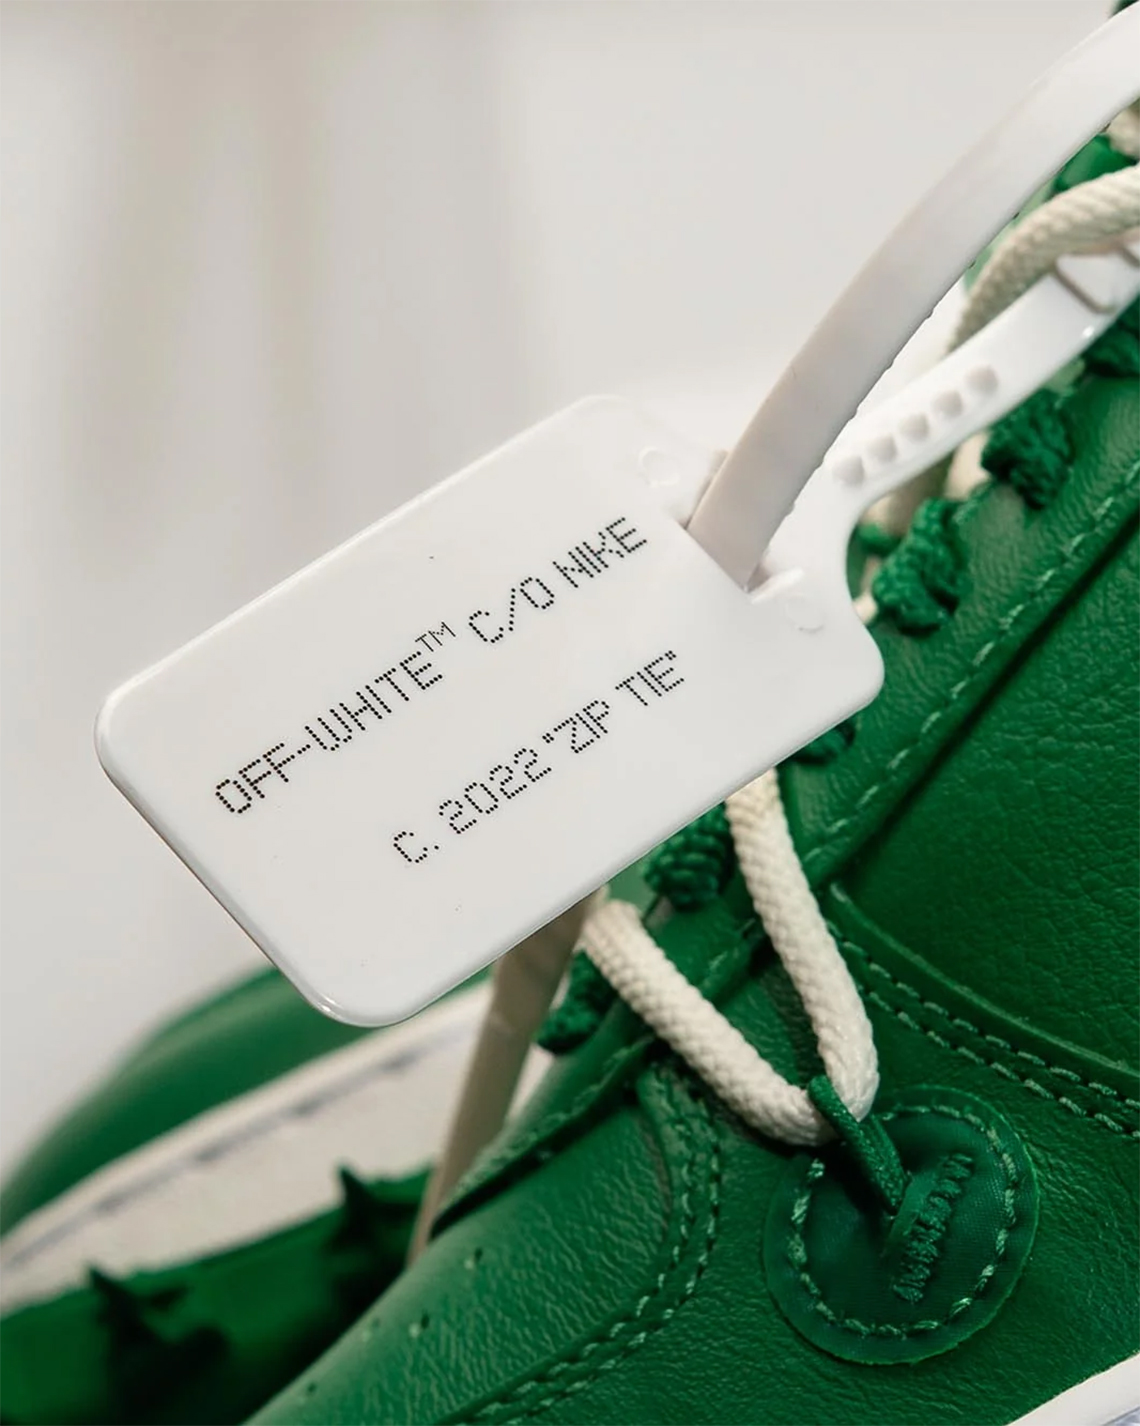 Nike x Off-White Air Force 1 Mid 'Pine Green' Release April 28th – Feature